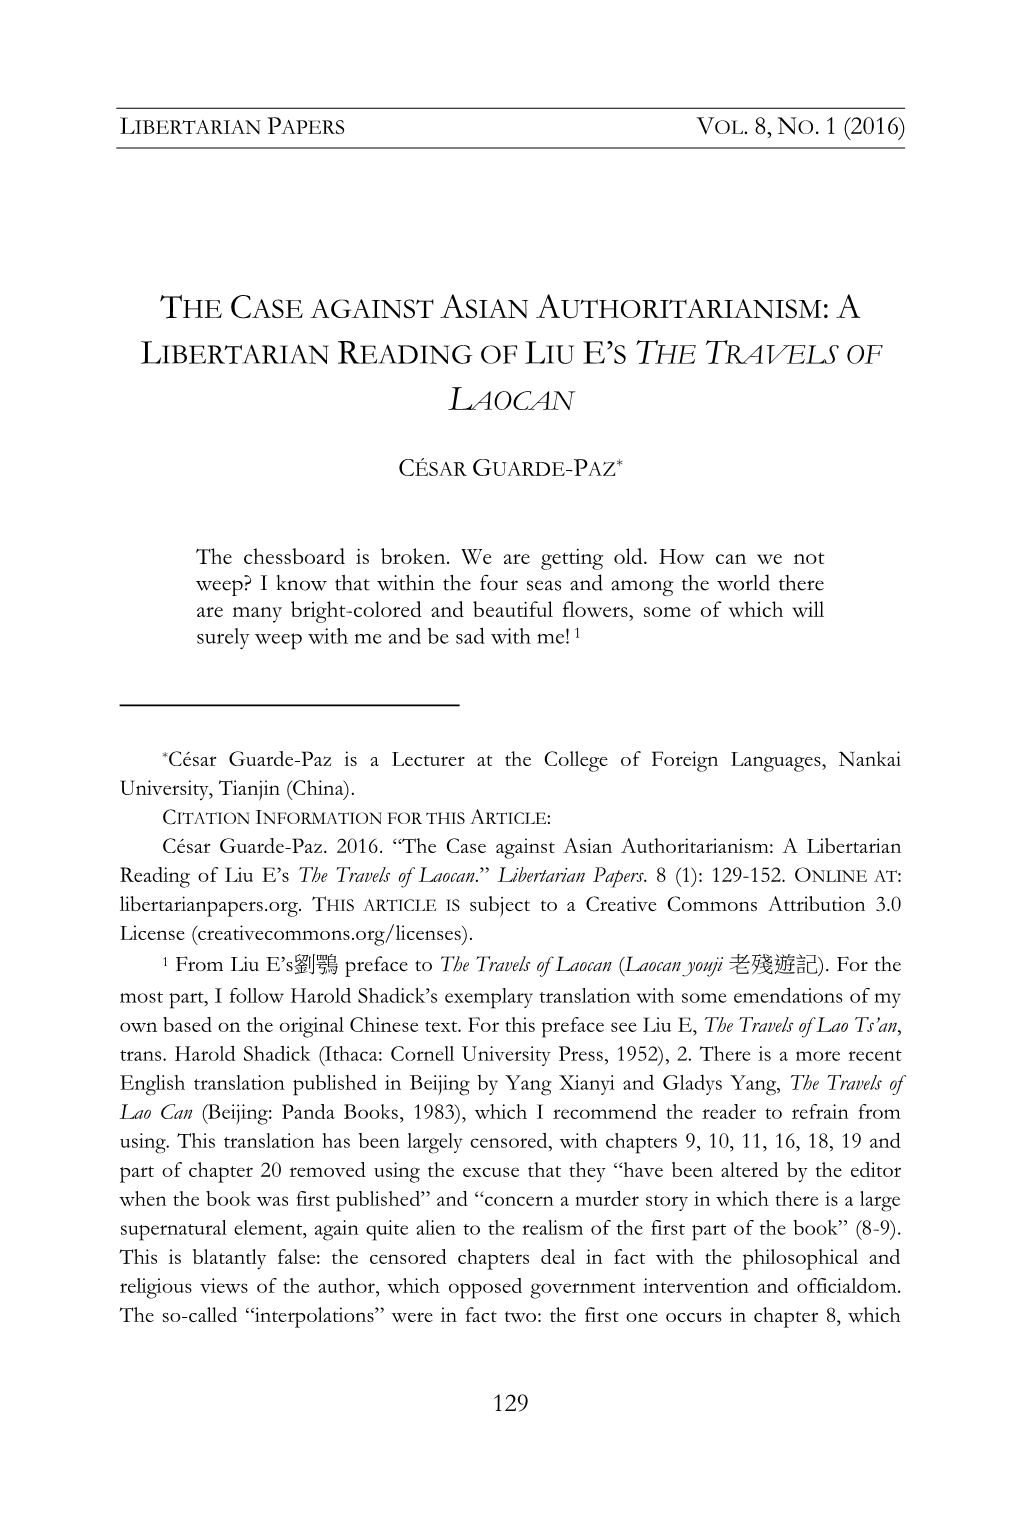 The Case Against Asian Authoritarianism: a Libertarian Reading of Liu E's the Travels of Laocan